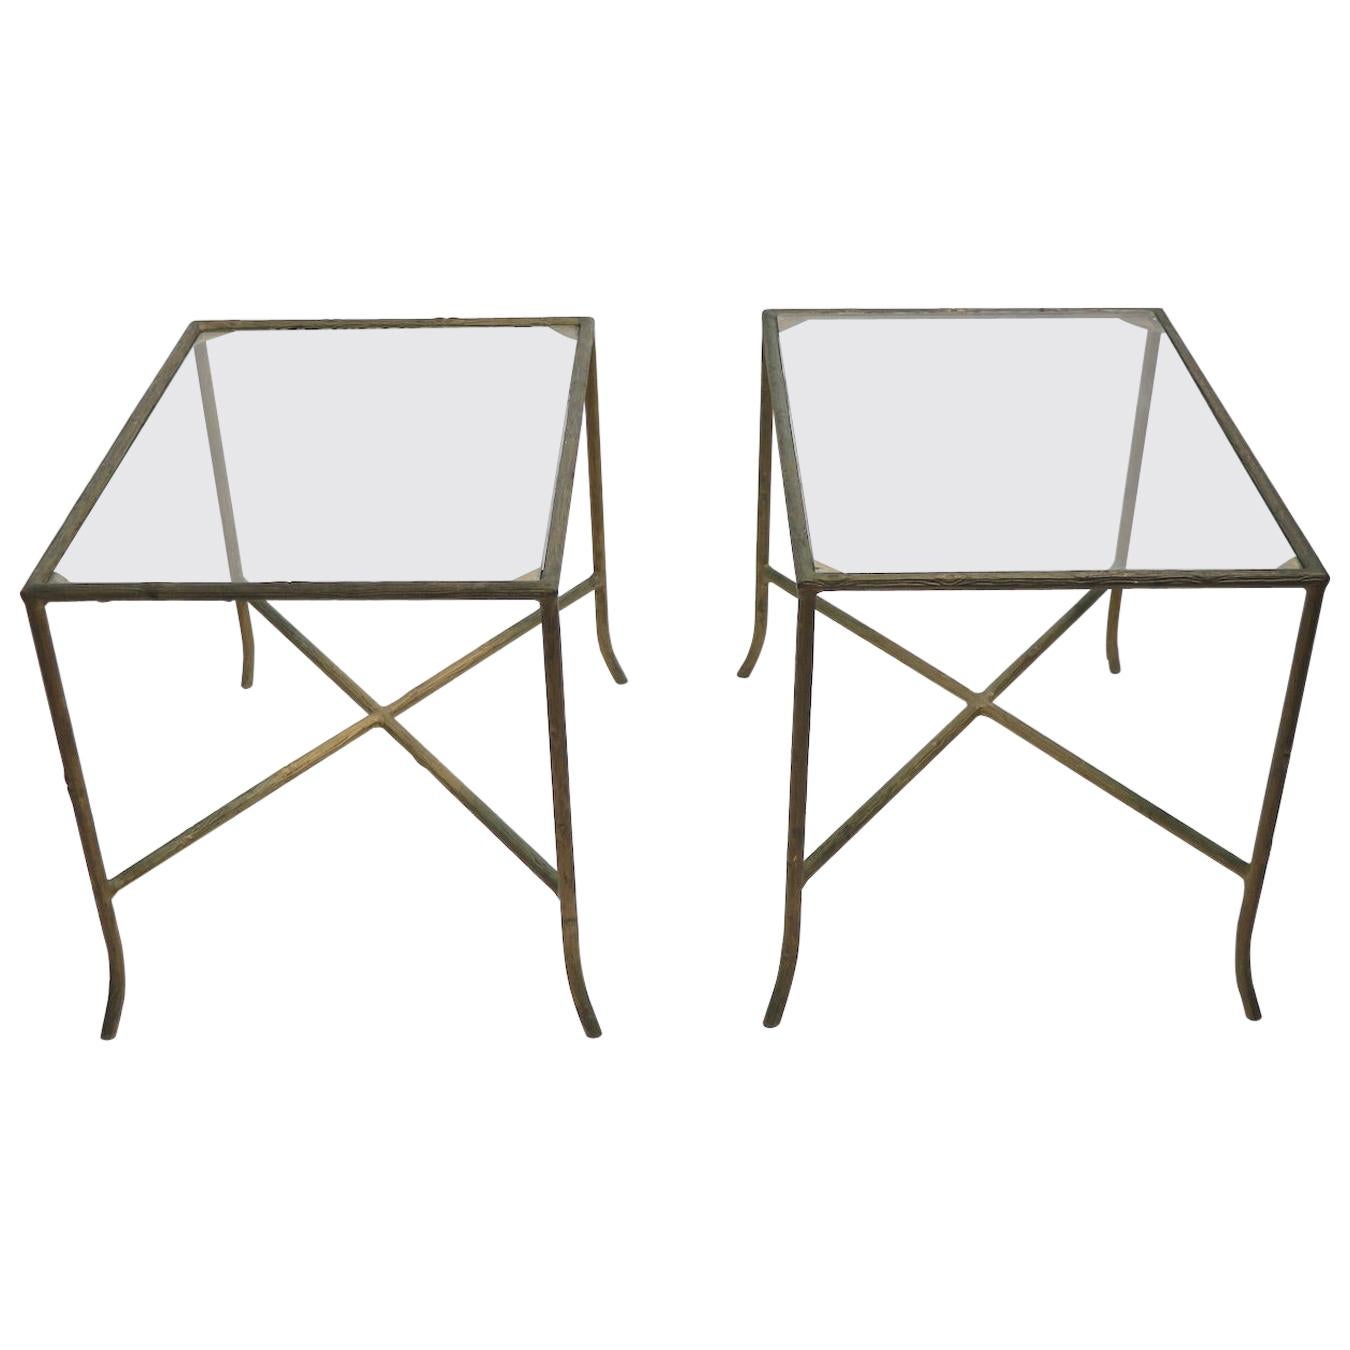 Pair of Faux Wood Cast Metal and Glass Tables